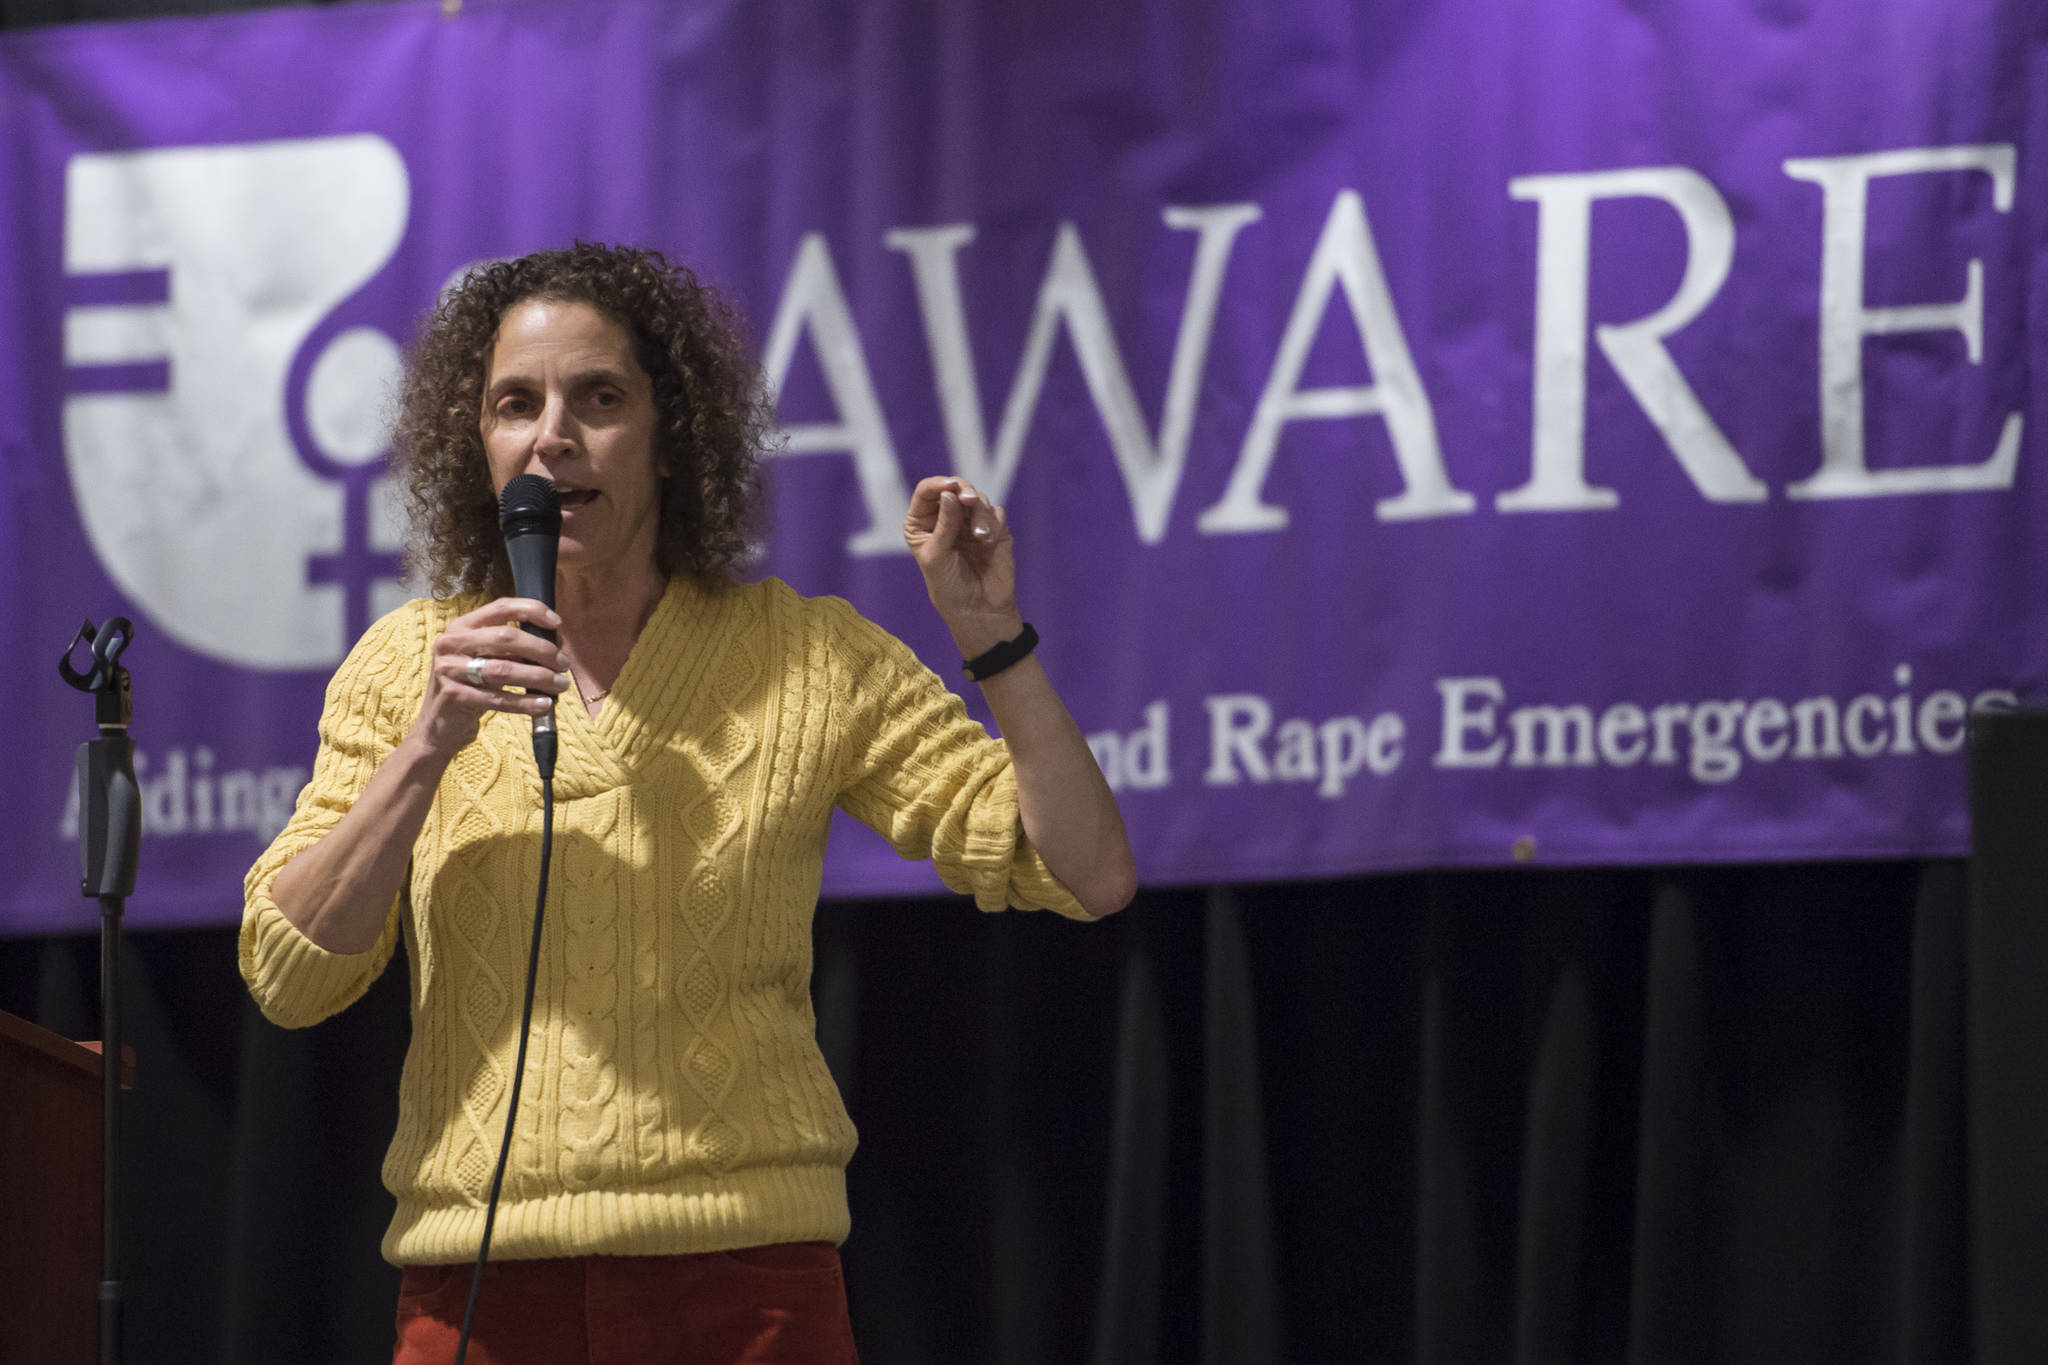 AWARE Executive Director Saralyn Tabachnick welcomes people attending a Celebrate Survivors gathering in the Elizabeth Peratrovich Hall on Tuesday, Oct. 23, 2018. The event is sponsored by Central Council Tlingit and Haida Indian Tribes of Alaska and AWARE. October is Domestic Violence Awareness Month. (Michael Penn | Juneau Empire)